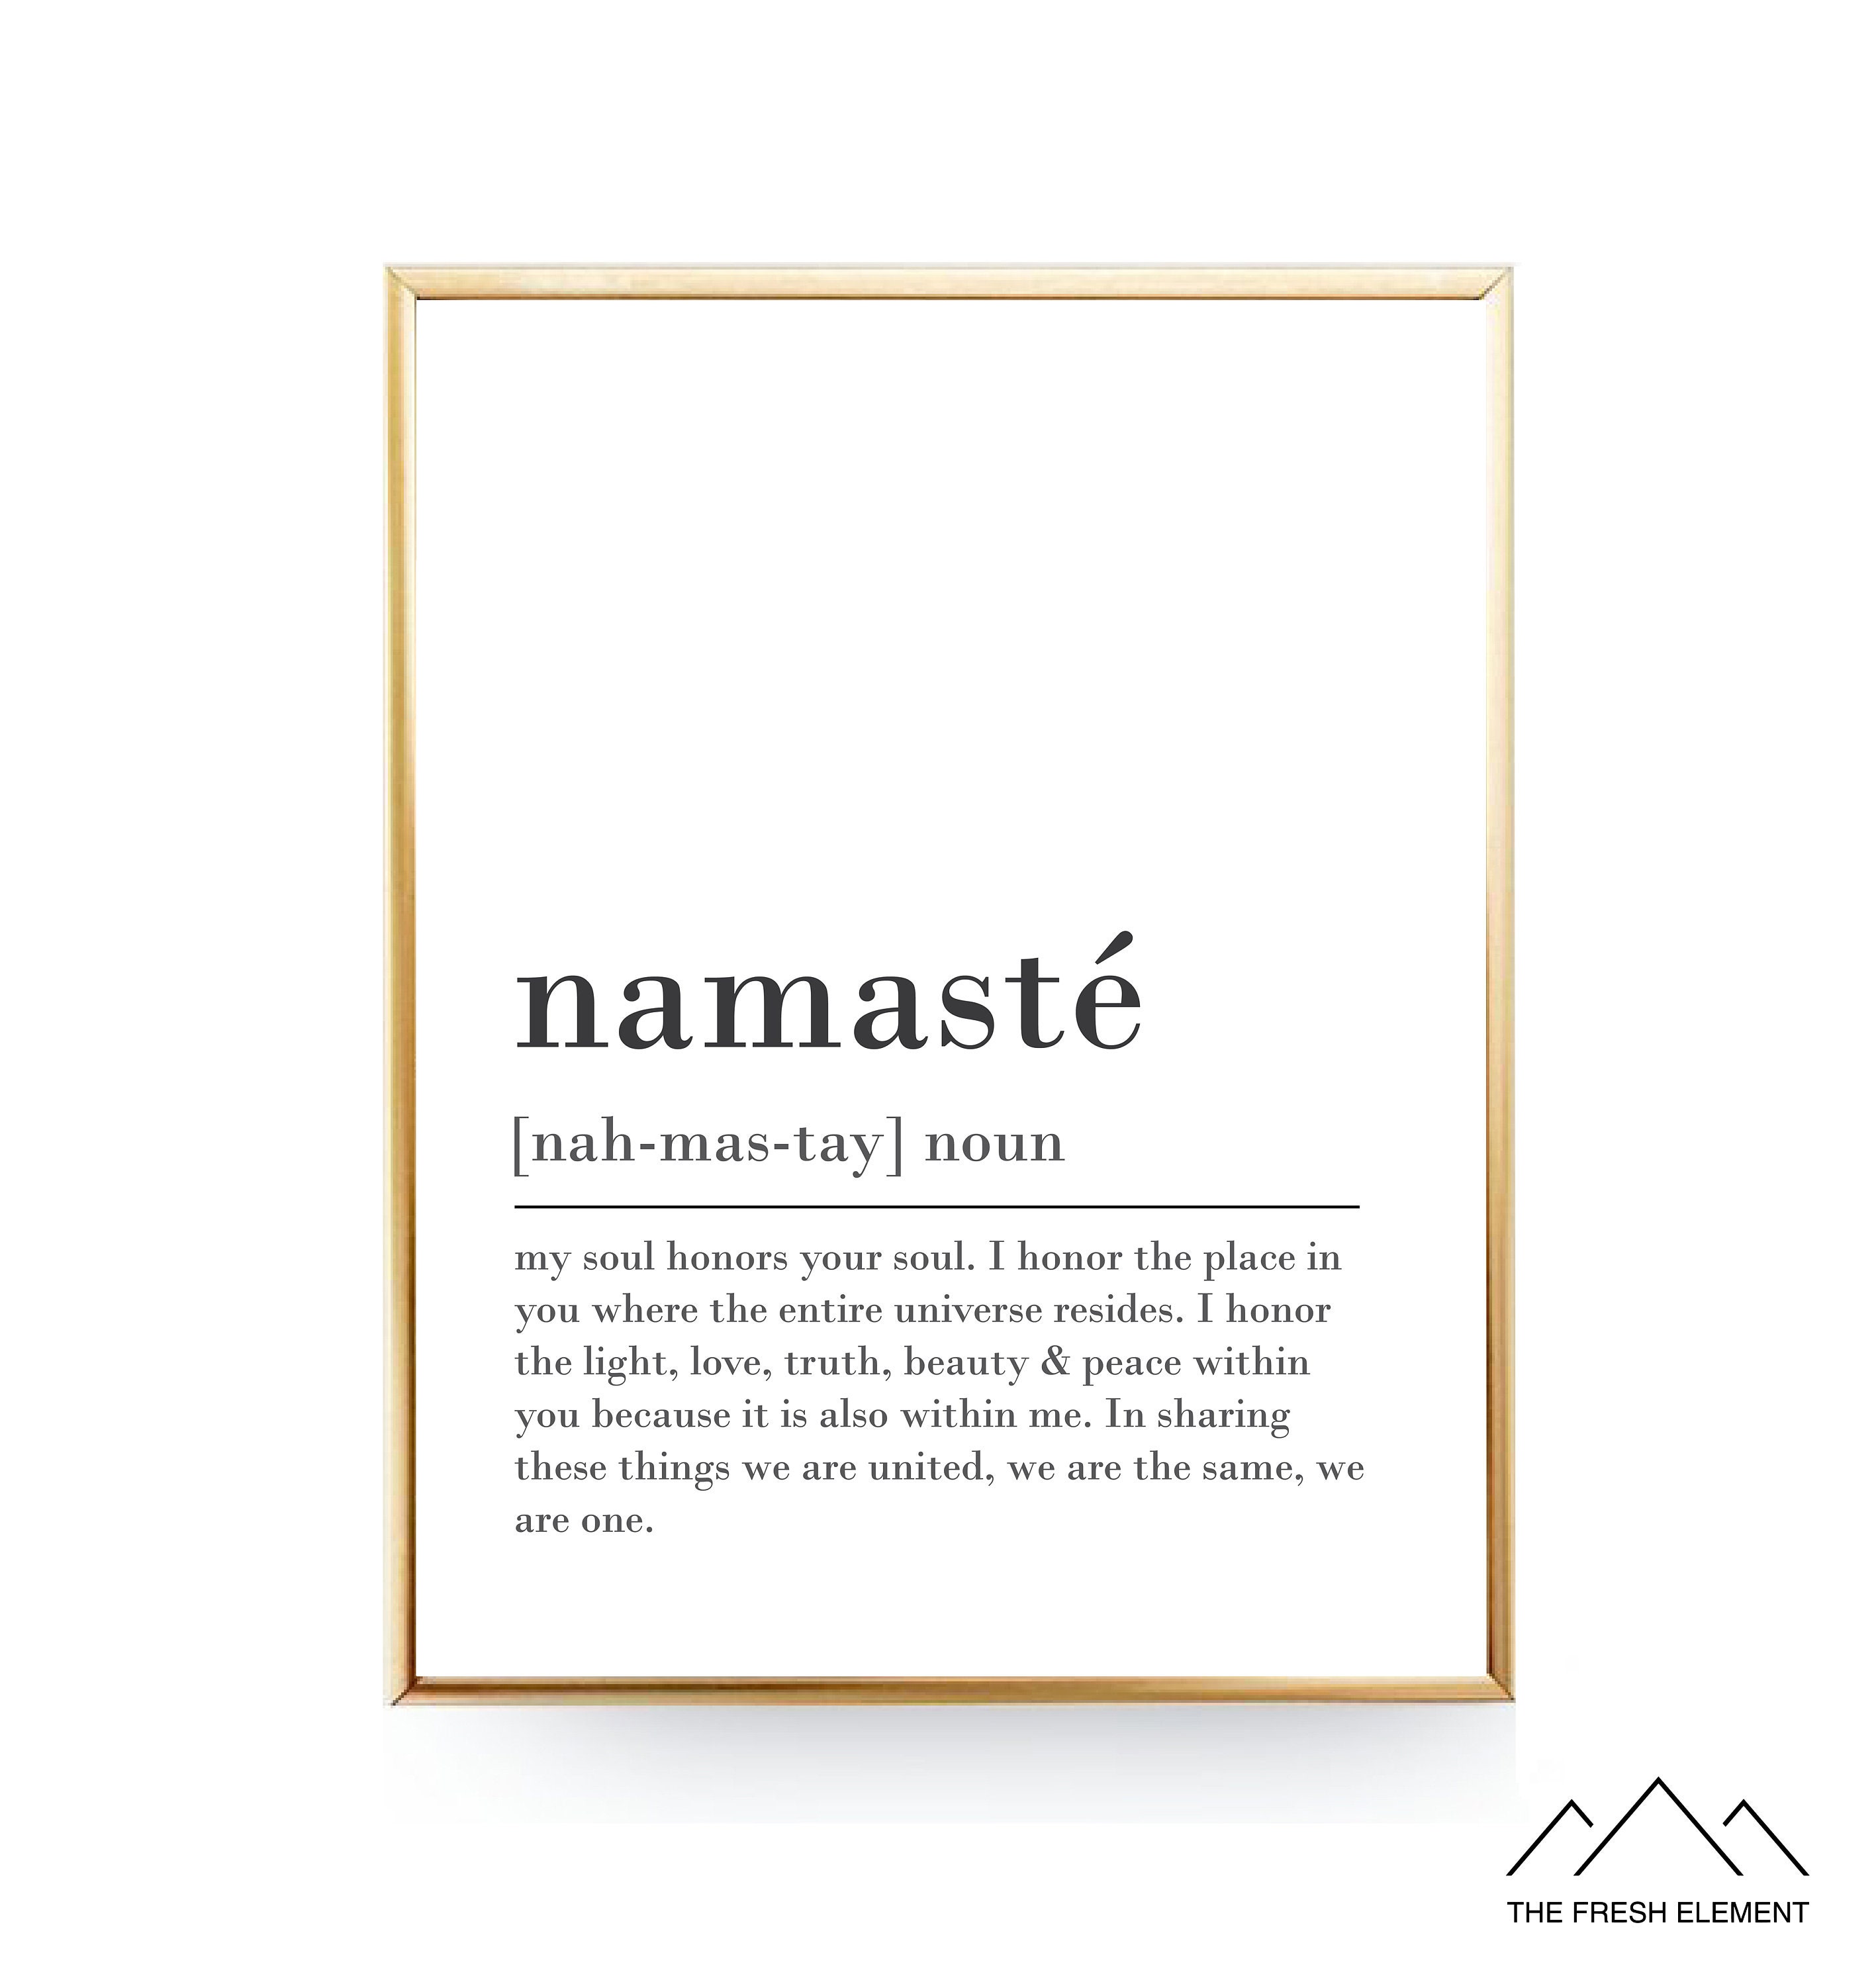 The Meaning of Namaste